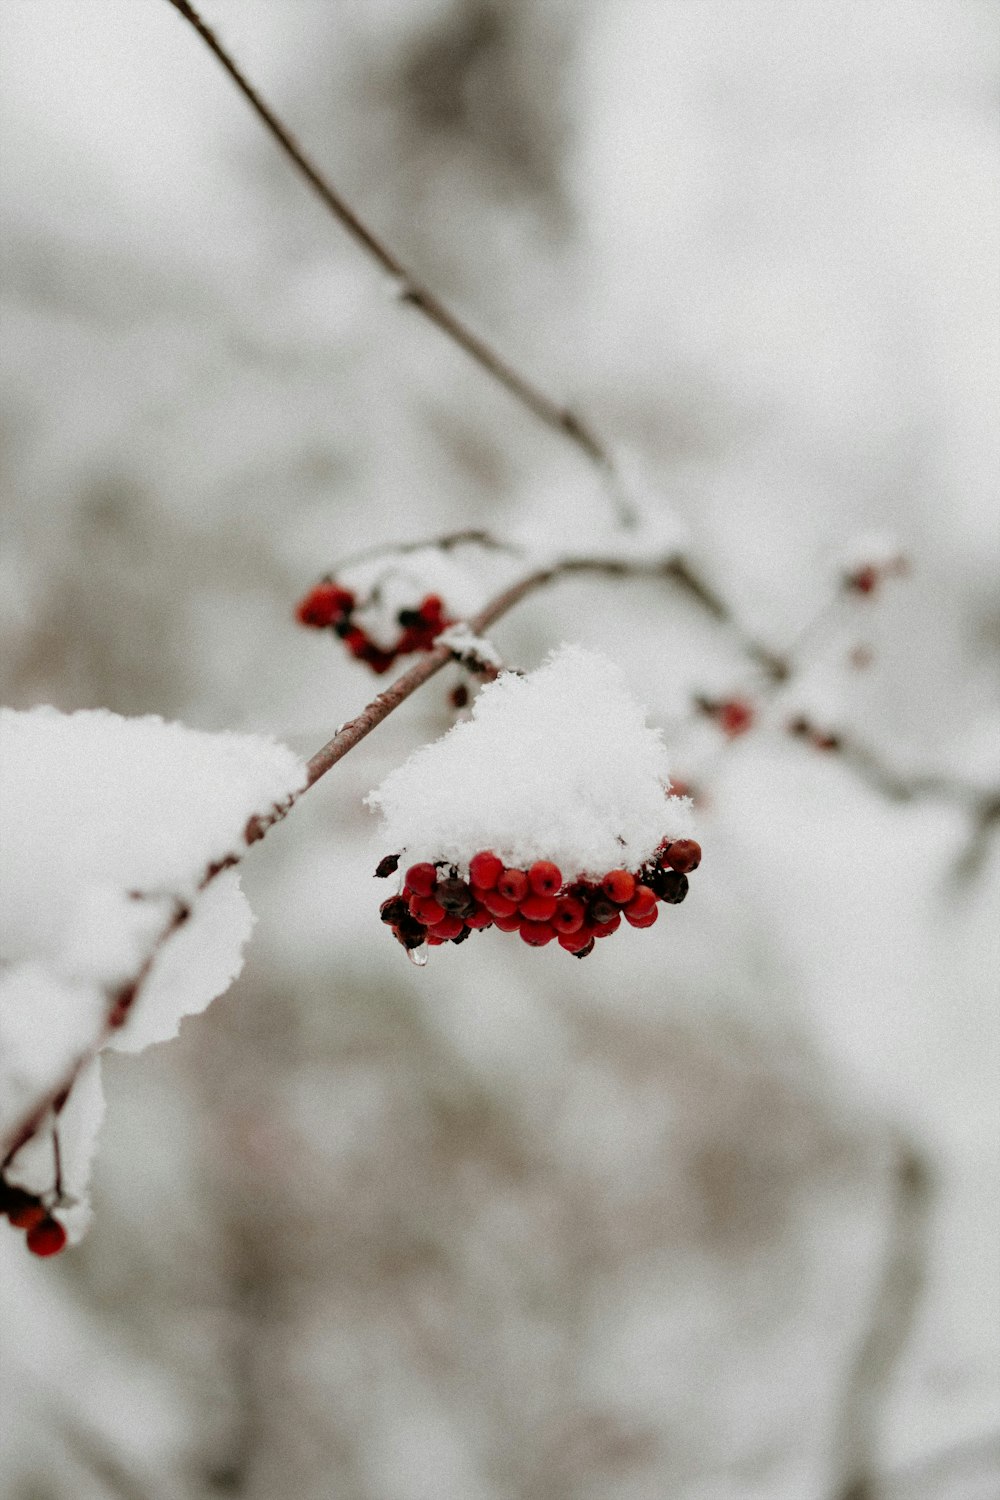 red fruits covered with snow in close-up photography